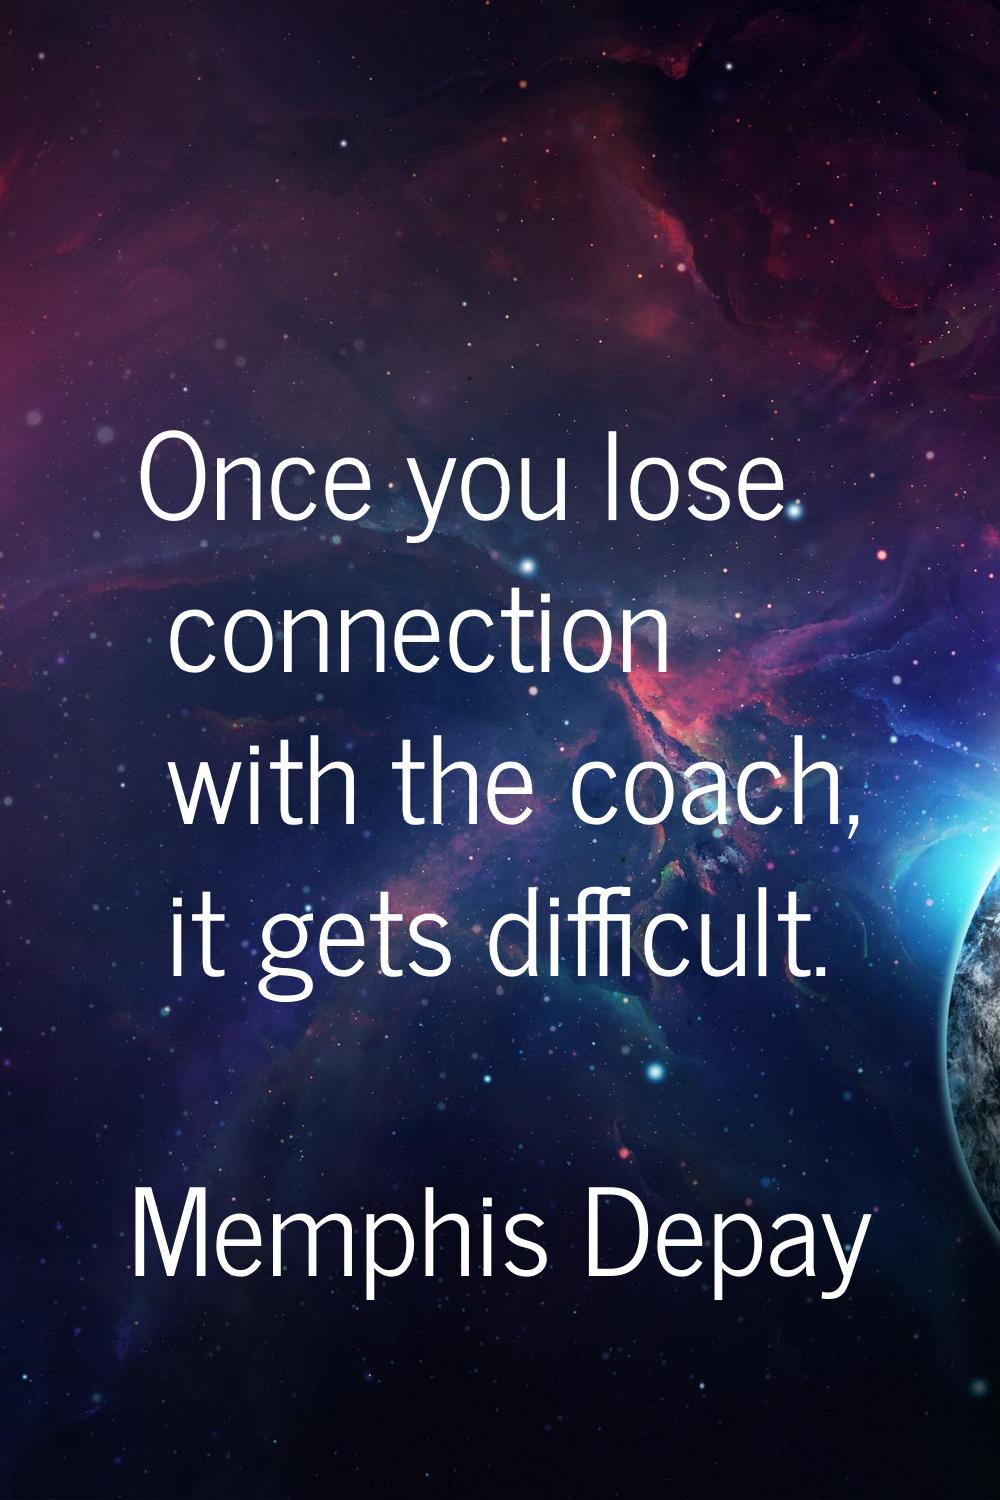 Once you lose connection with the coach, it gets difficult.